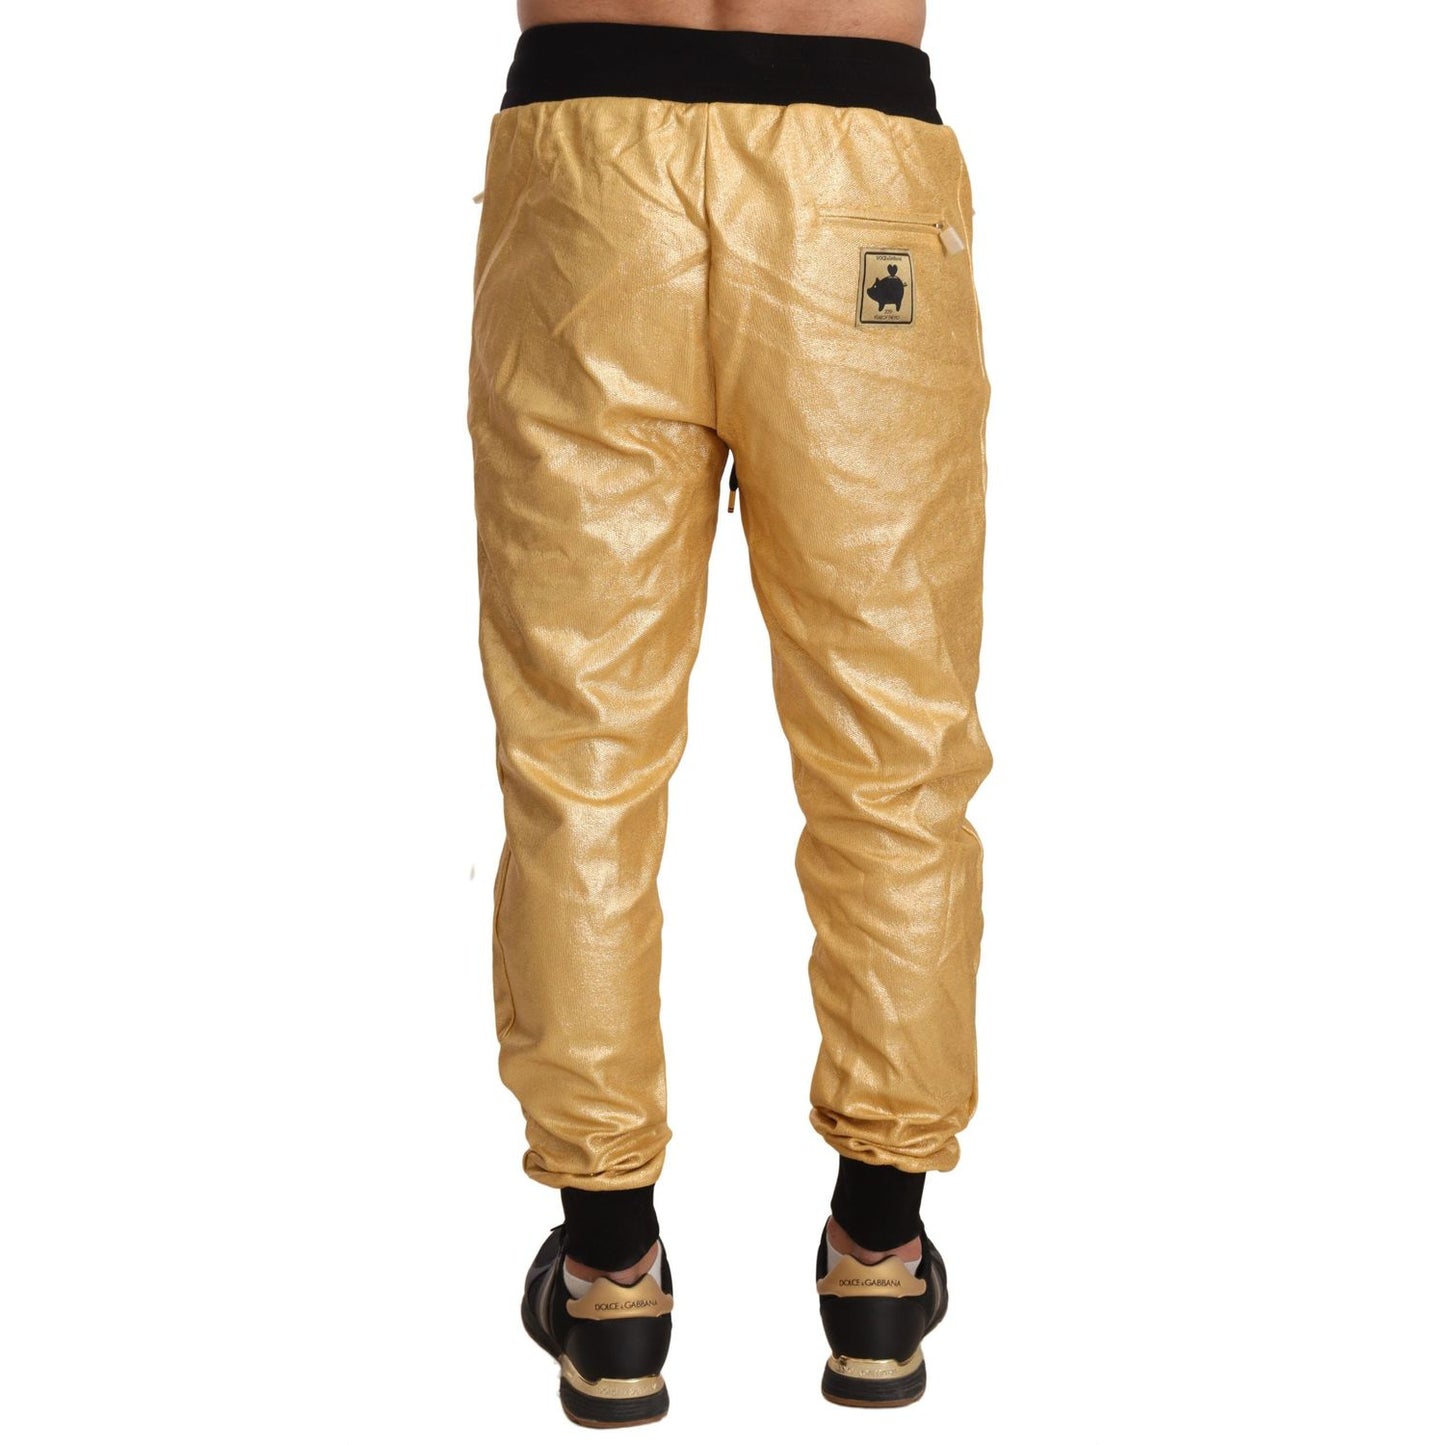 Dolce & Gabbana Gold Year of the Pig Sweatpants gold-pig-of-the-year-cotton-trousers-pants IMG_1106-scaled-4f4f9266-895.jpg